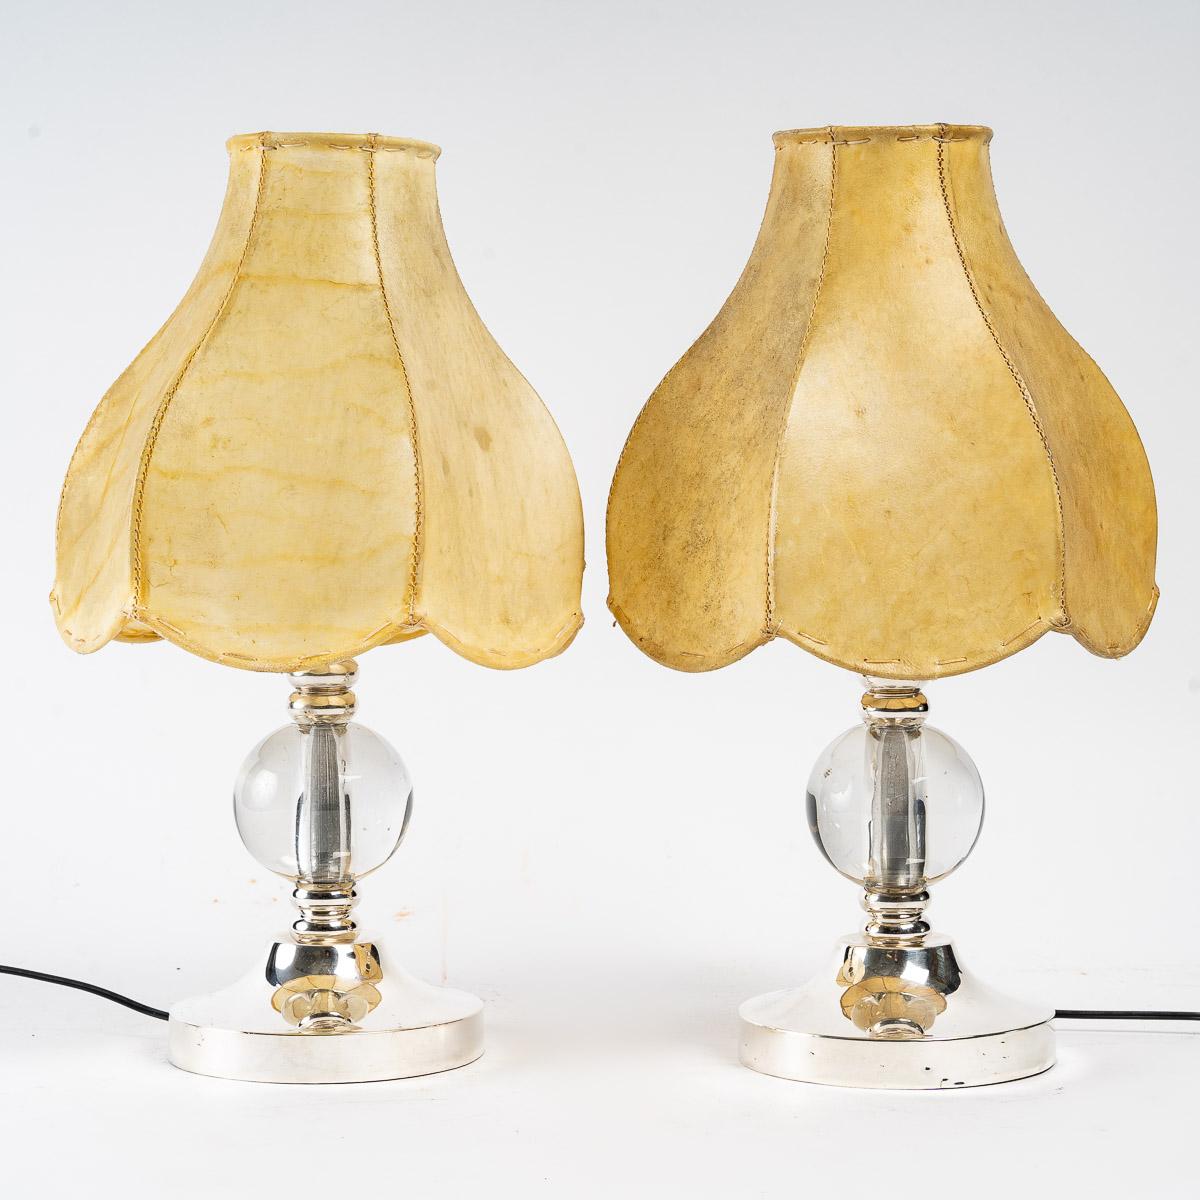 Pair of lamps from Chevets, 1930
Crystal and silver plated bronze, parchment shade.
Measures: H: 31.5 cm, D: 19 cm.
    